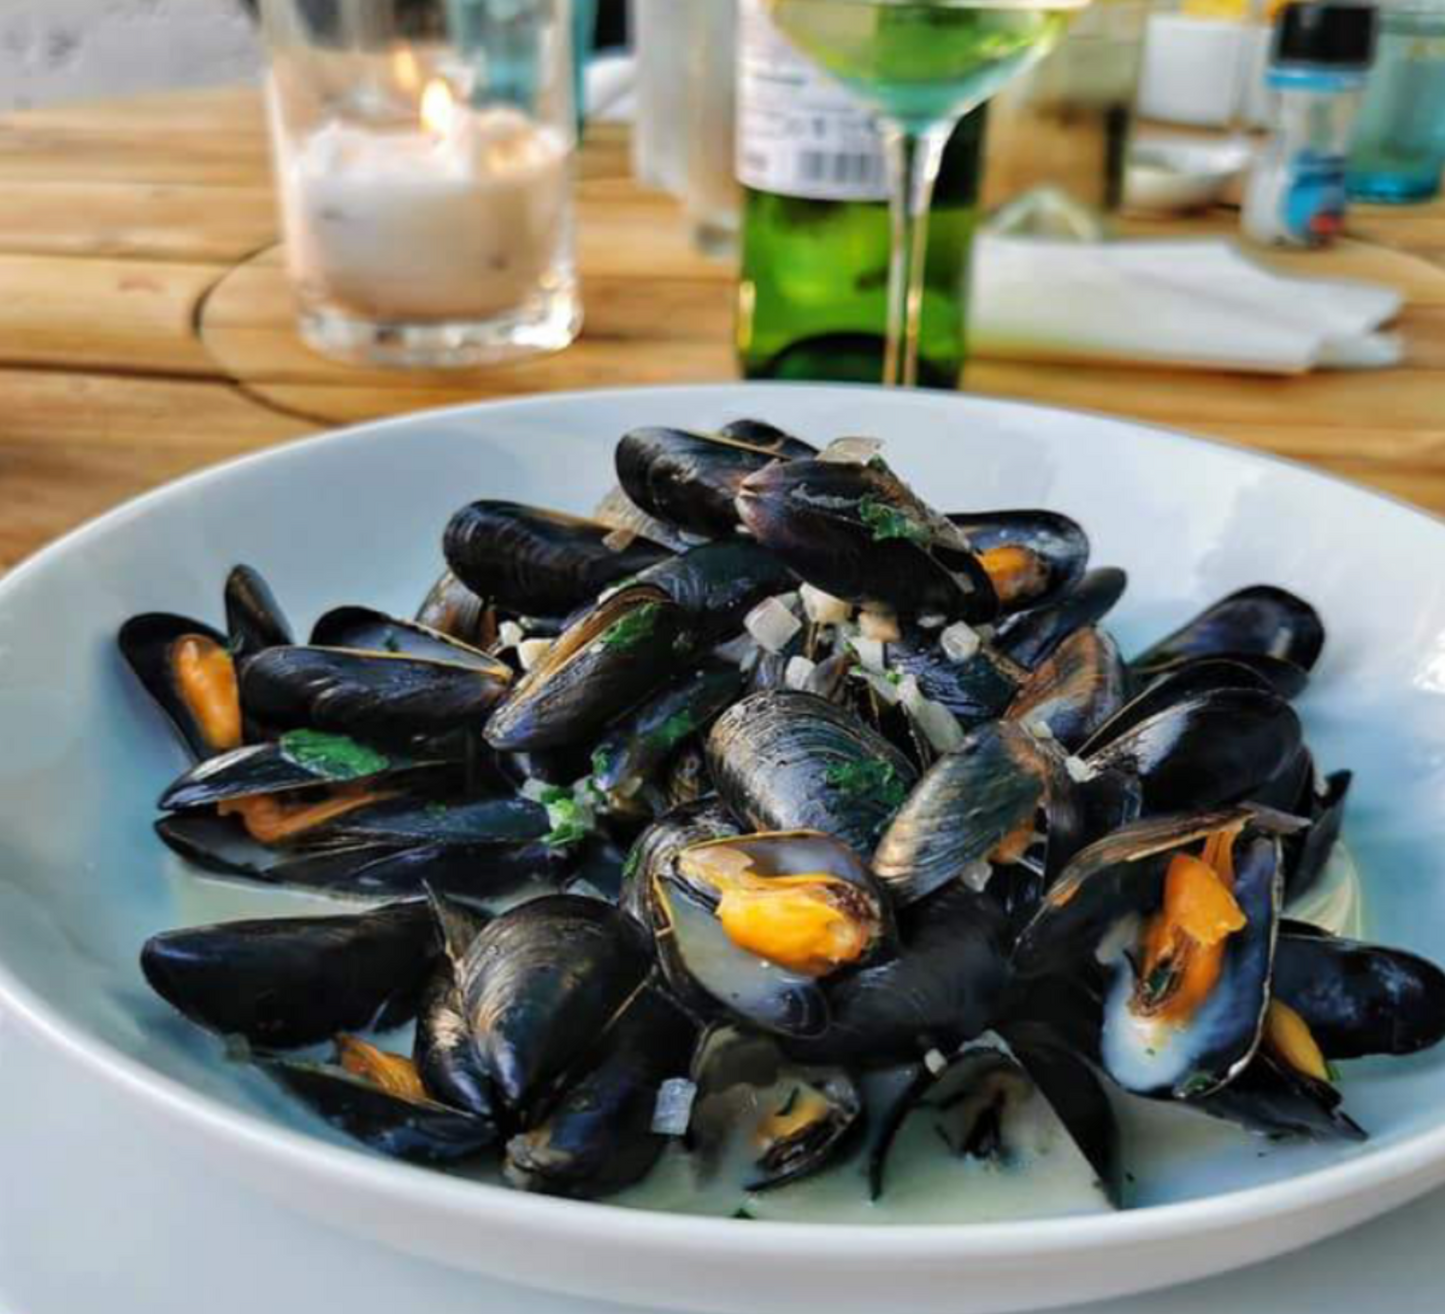 2kg Net of River Fowey Mussels, delivered to your door. We deliver to Bristol, Somerset, Bath, Weston Super Mare, Taunton, Newport, North Somerset, and Gloucestershire. Order your fish and meat with us today, order online or by phone.